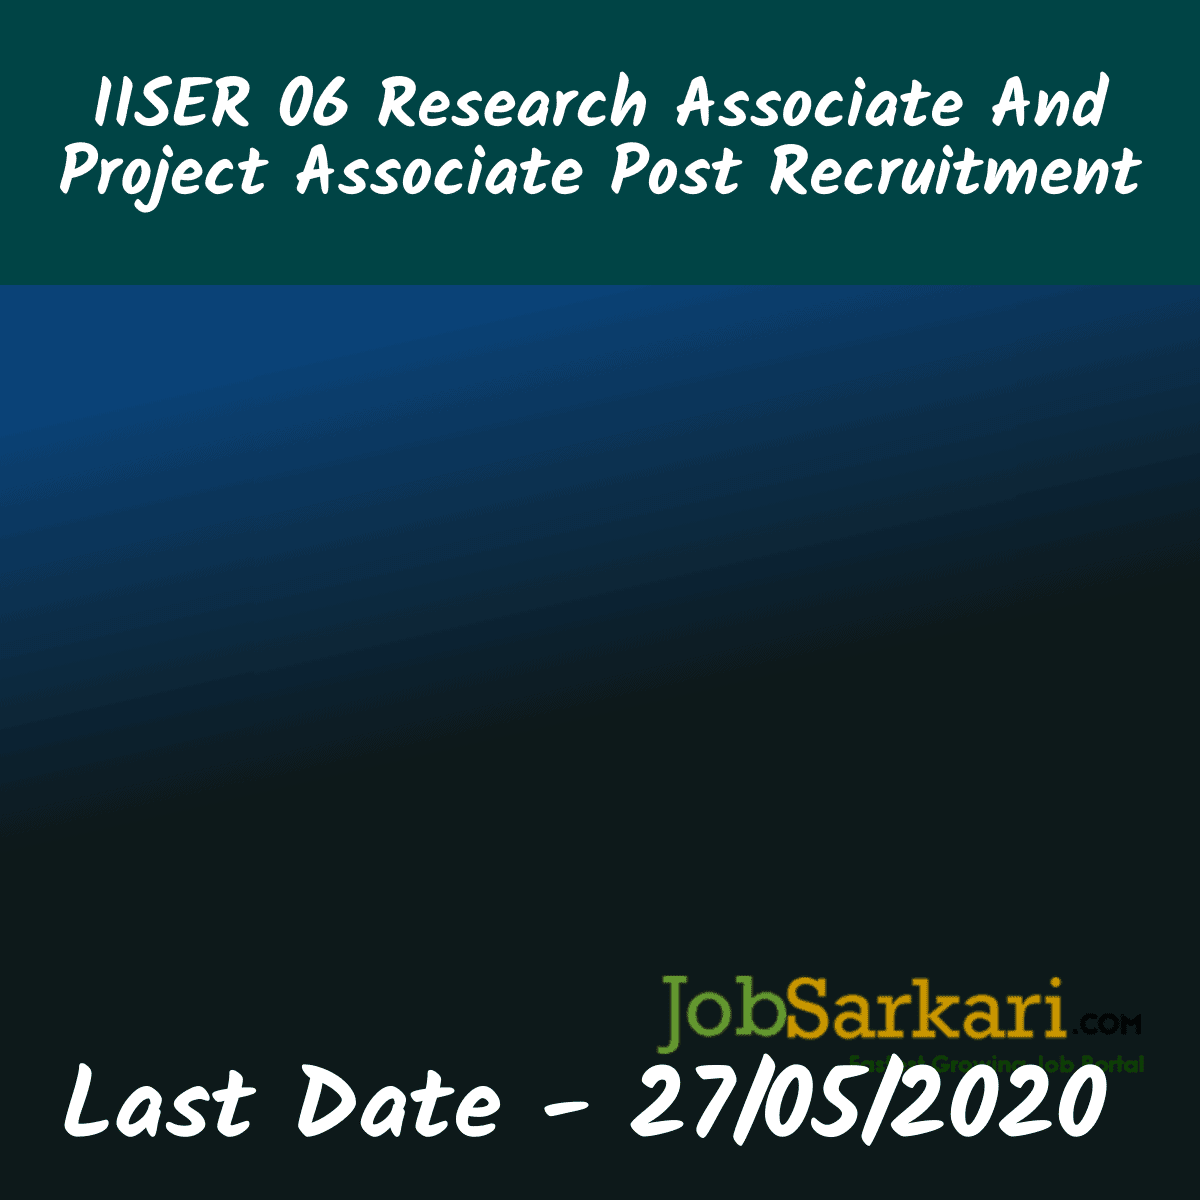 IISER Recruitment 2020 for Research Associate And Project Associate Post